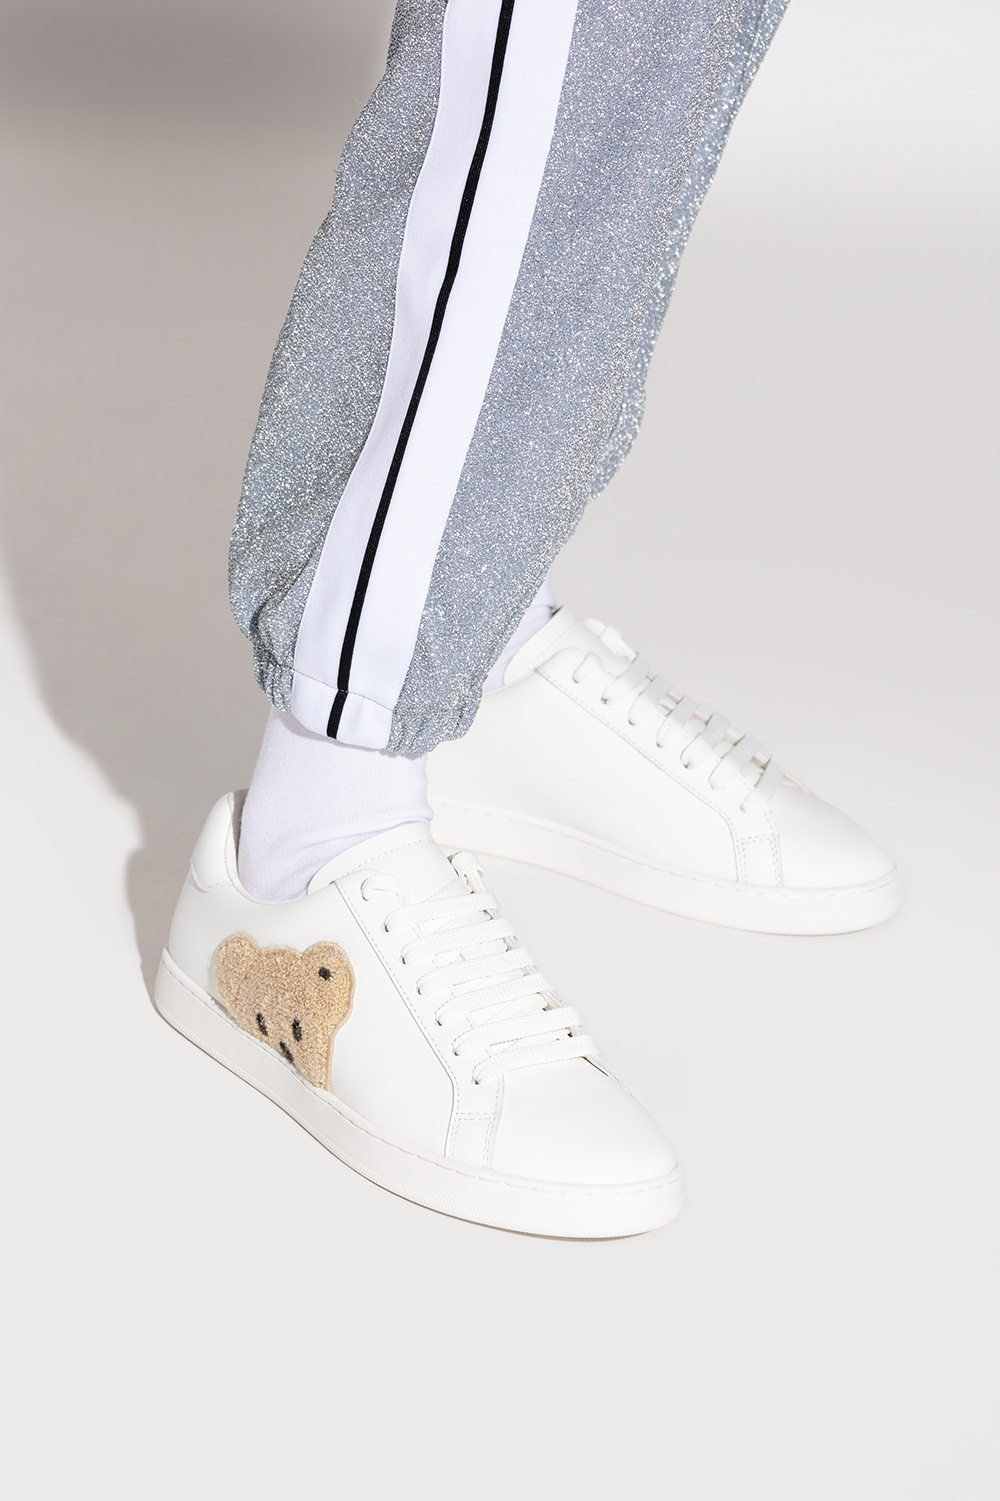 Palm Angels recently debuted Avid Cutout Sneakers